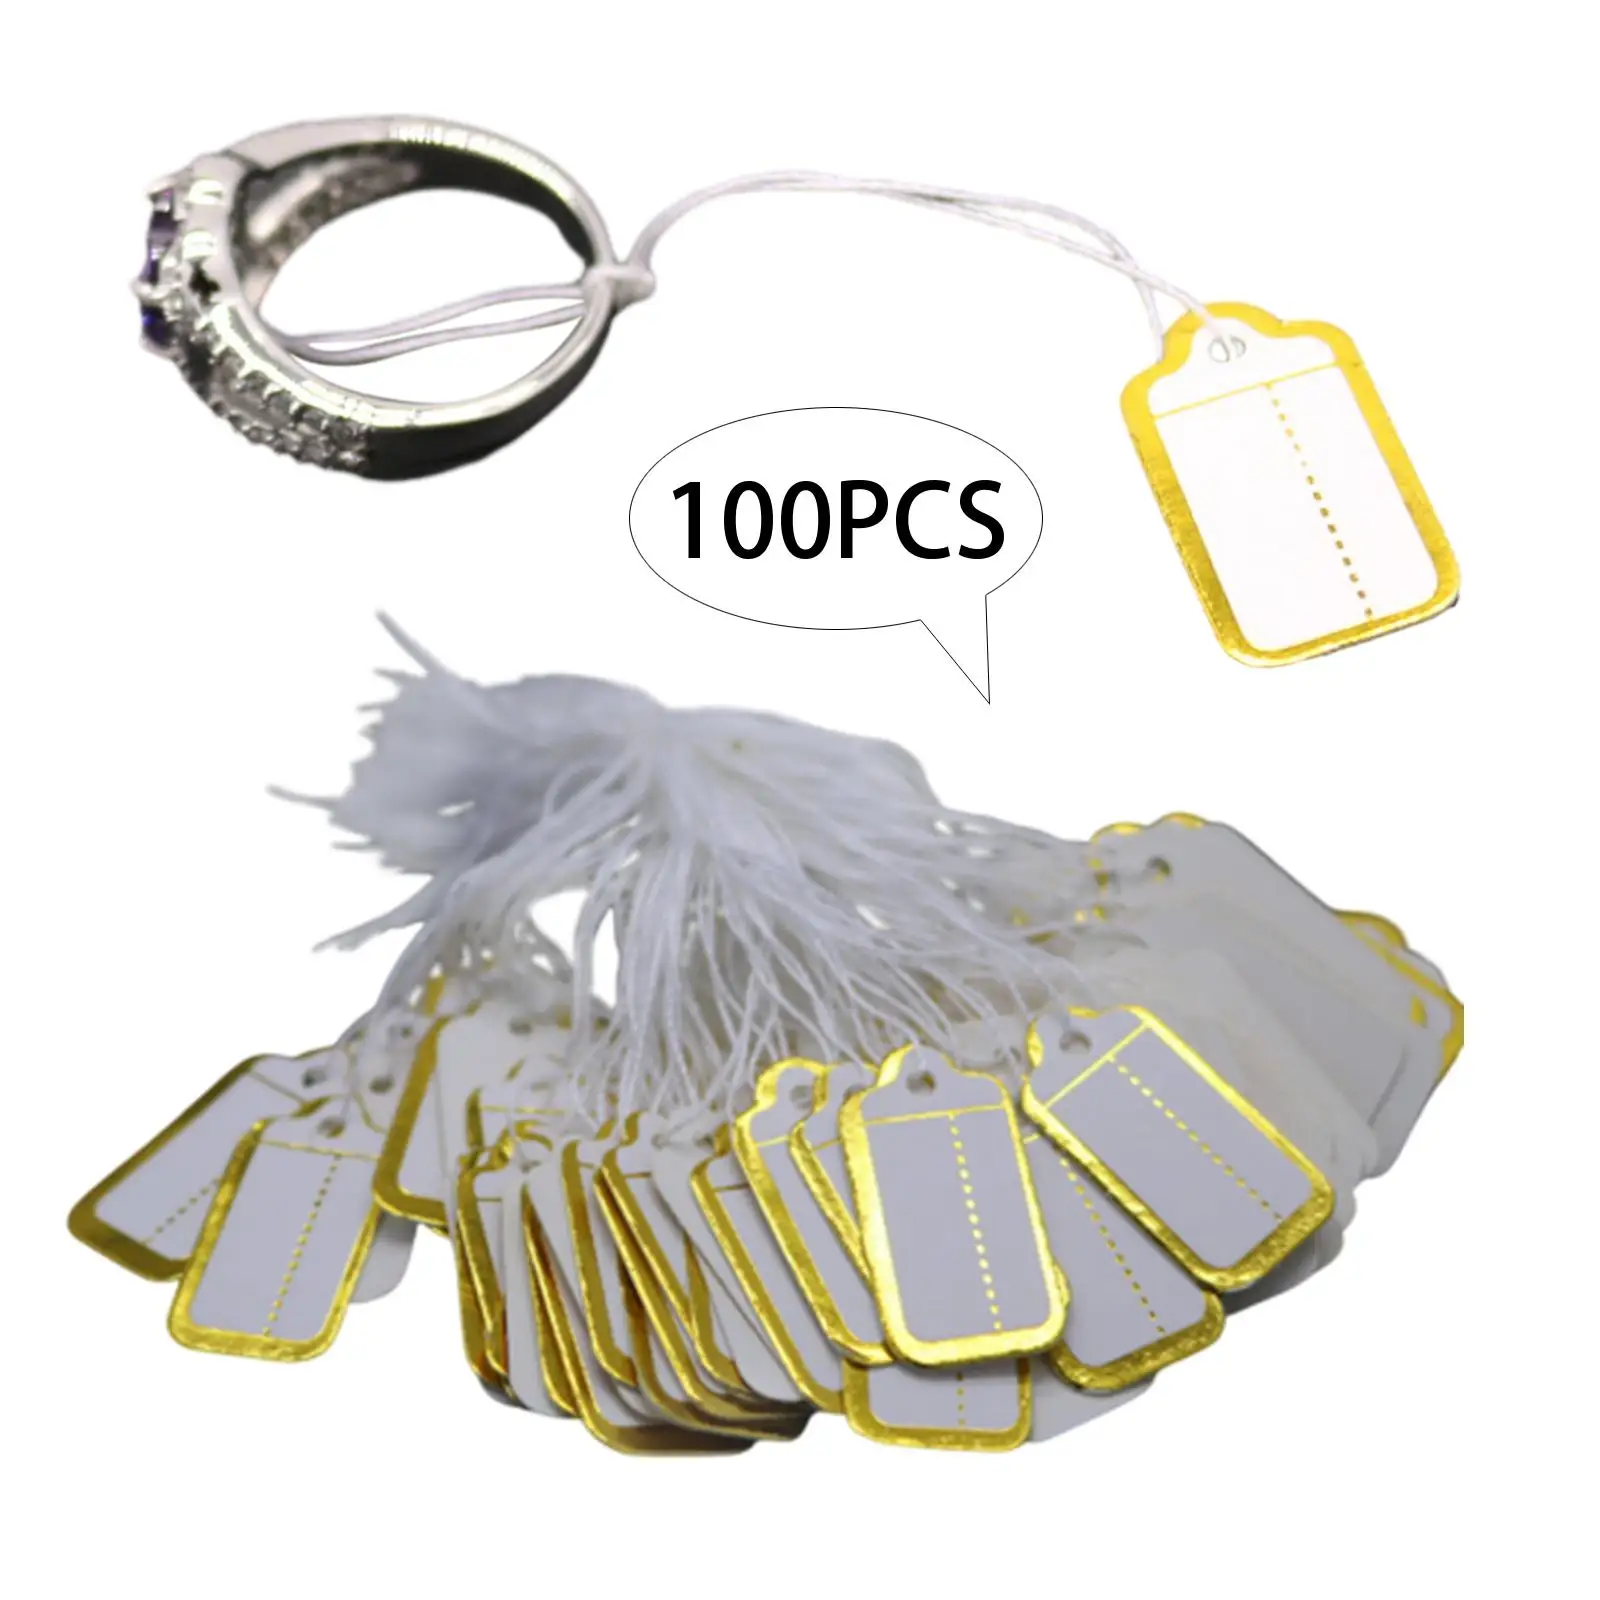 100 Pieces Price Tags with String Attached Price Hanging Labels Marking Tag for Party Favor Wedding Product Retail Rings